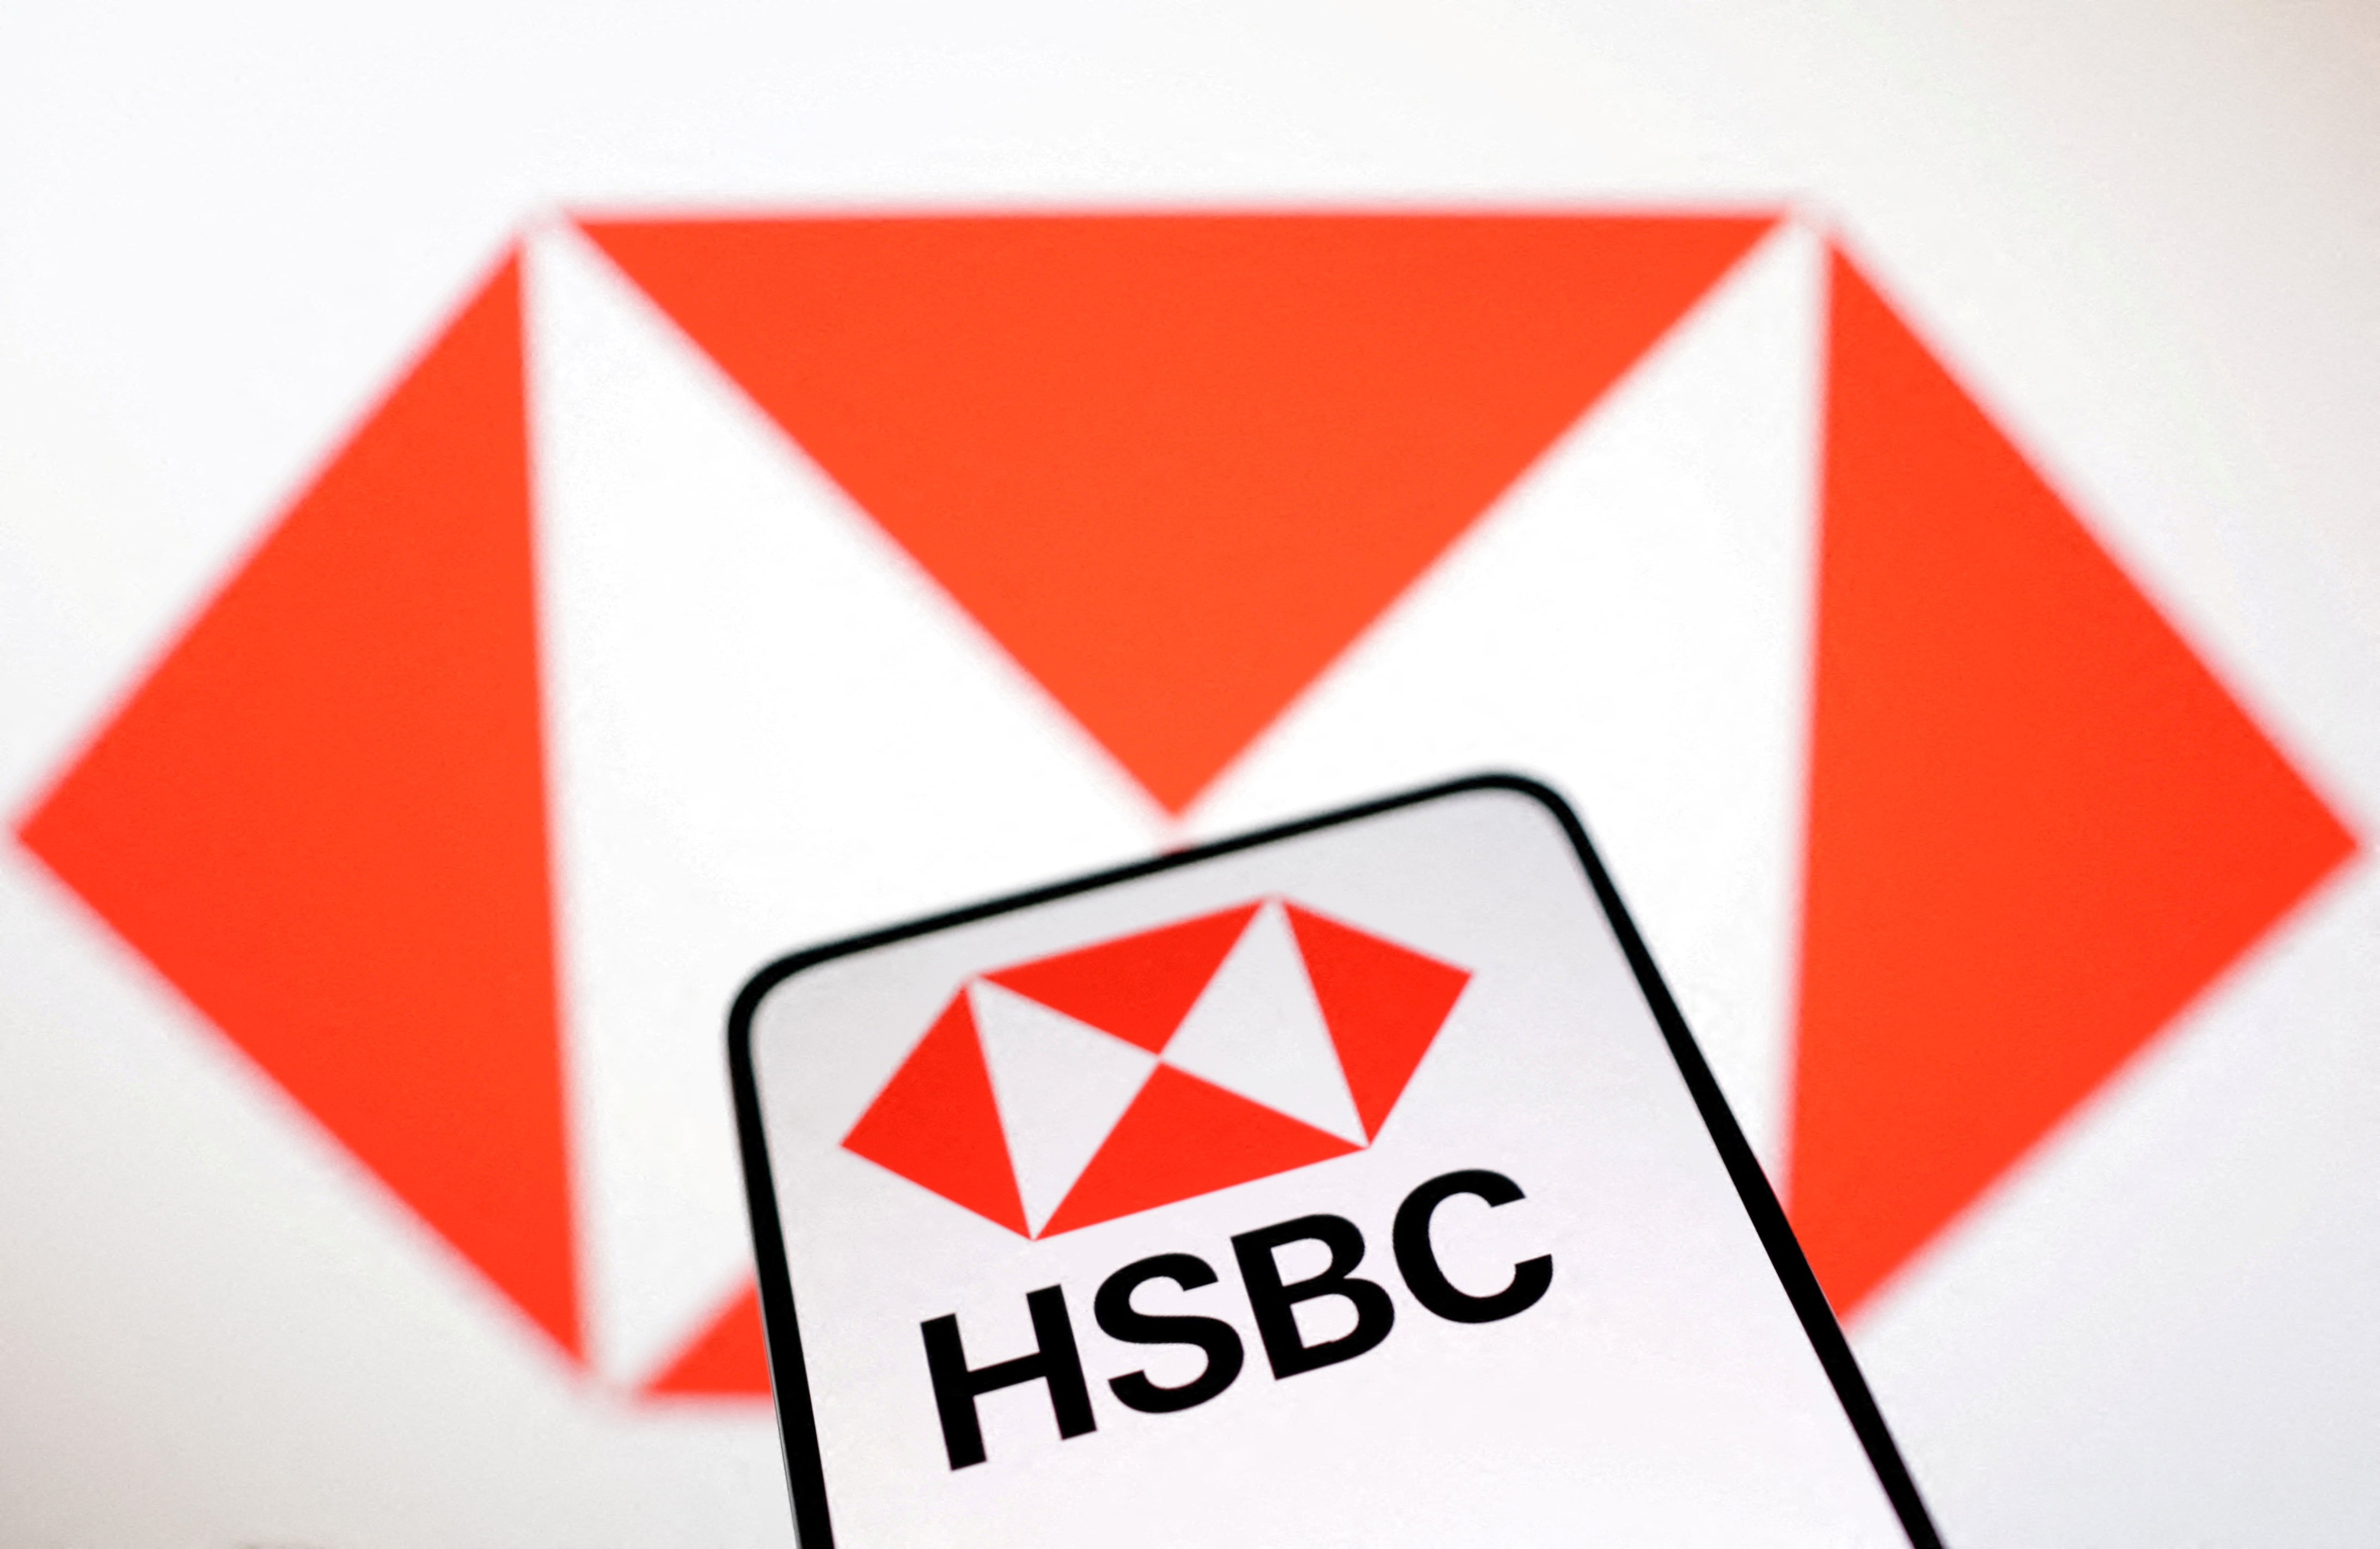 HSBC’s net interest income fell by 3%, or 300 million US dollars (£239 million), to 8.7 billion US dollars (£6.9 billion)